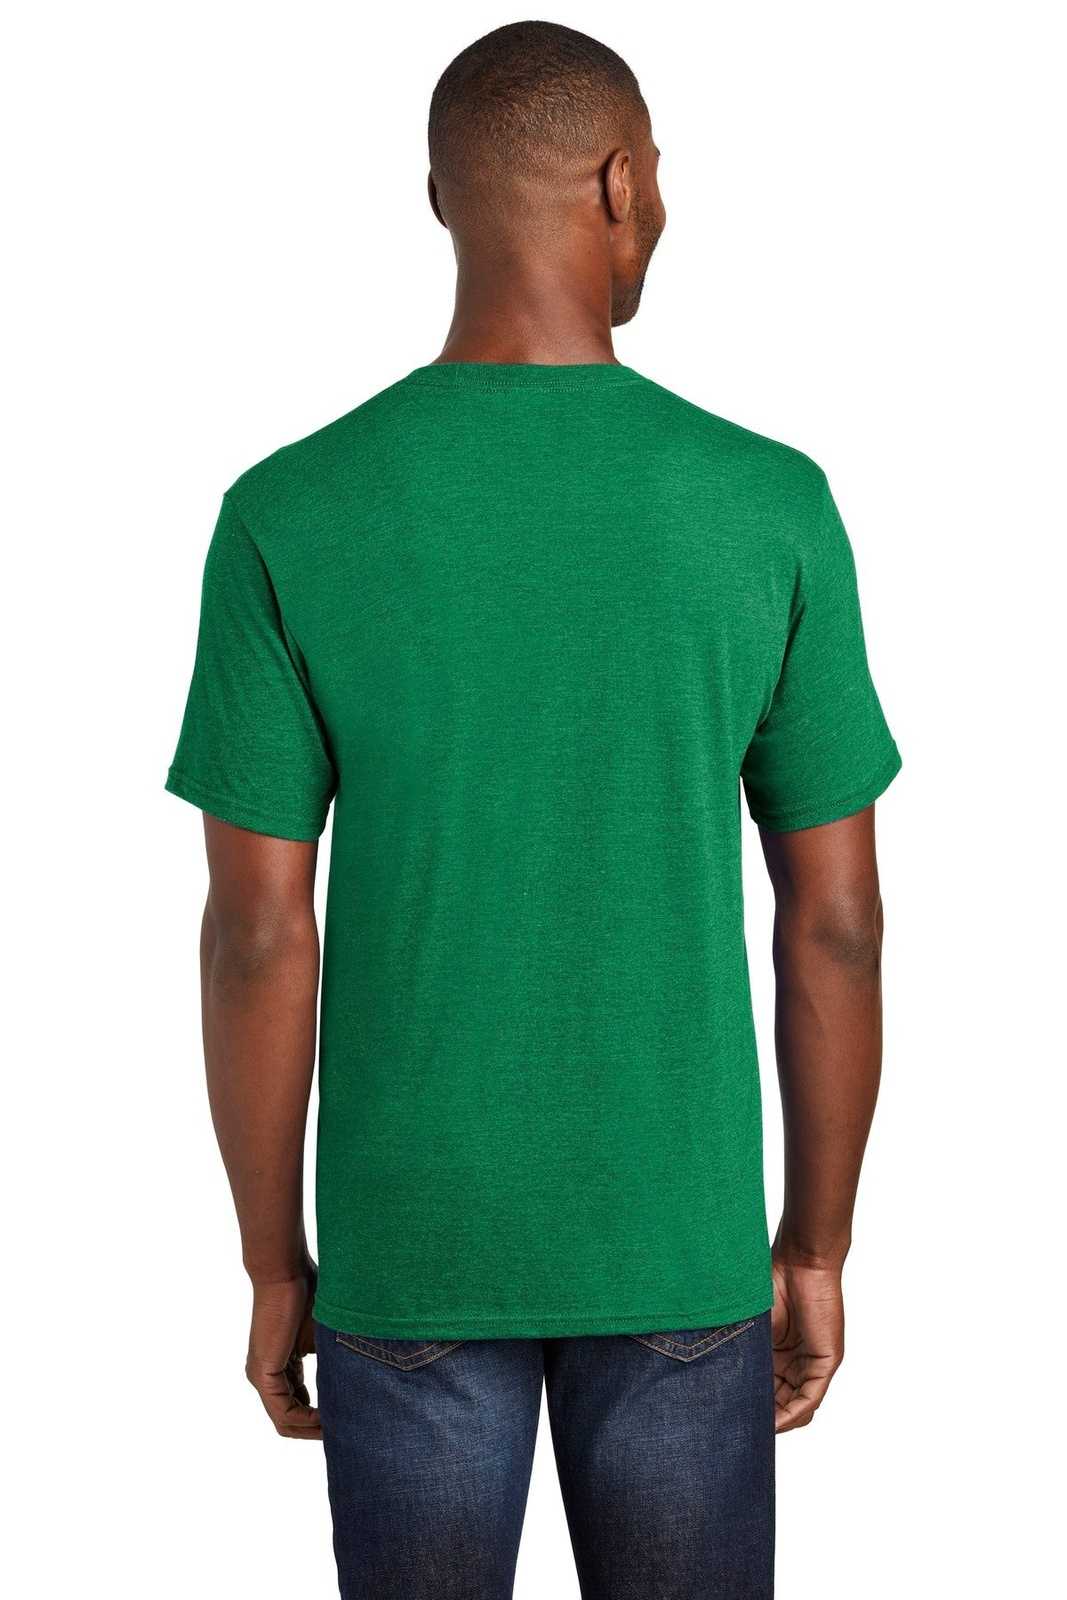 Port & Company PC455 Fan Favorite Blend Tee - Athletic Kelly Green Heather - HIT a Double - 1